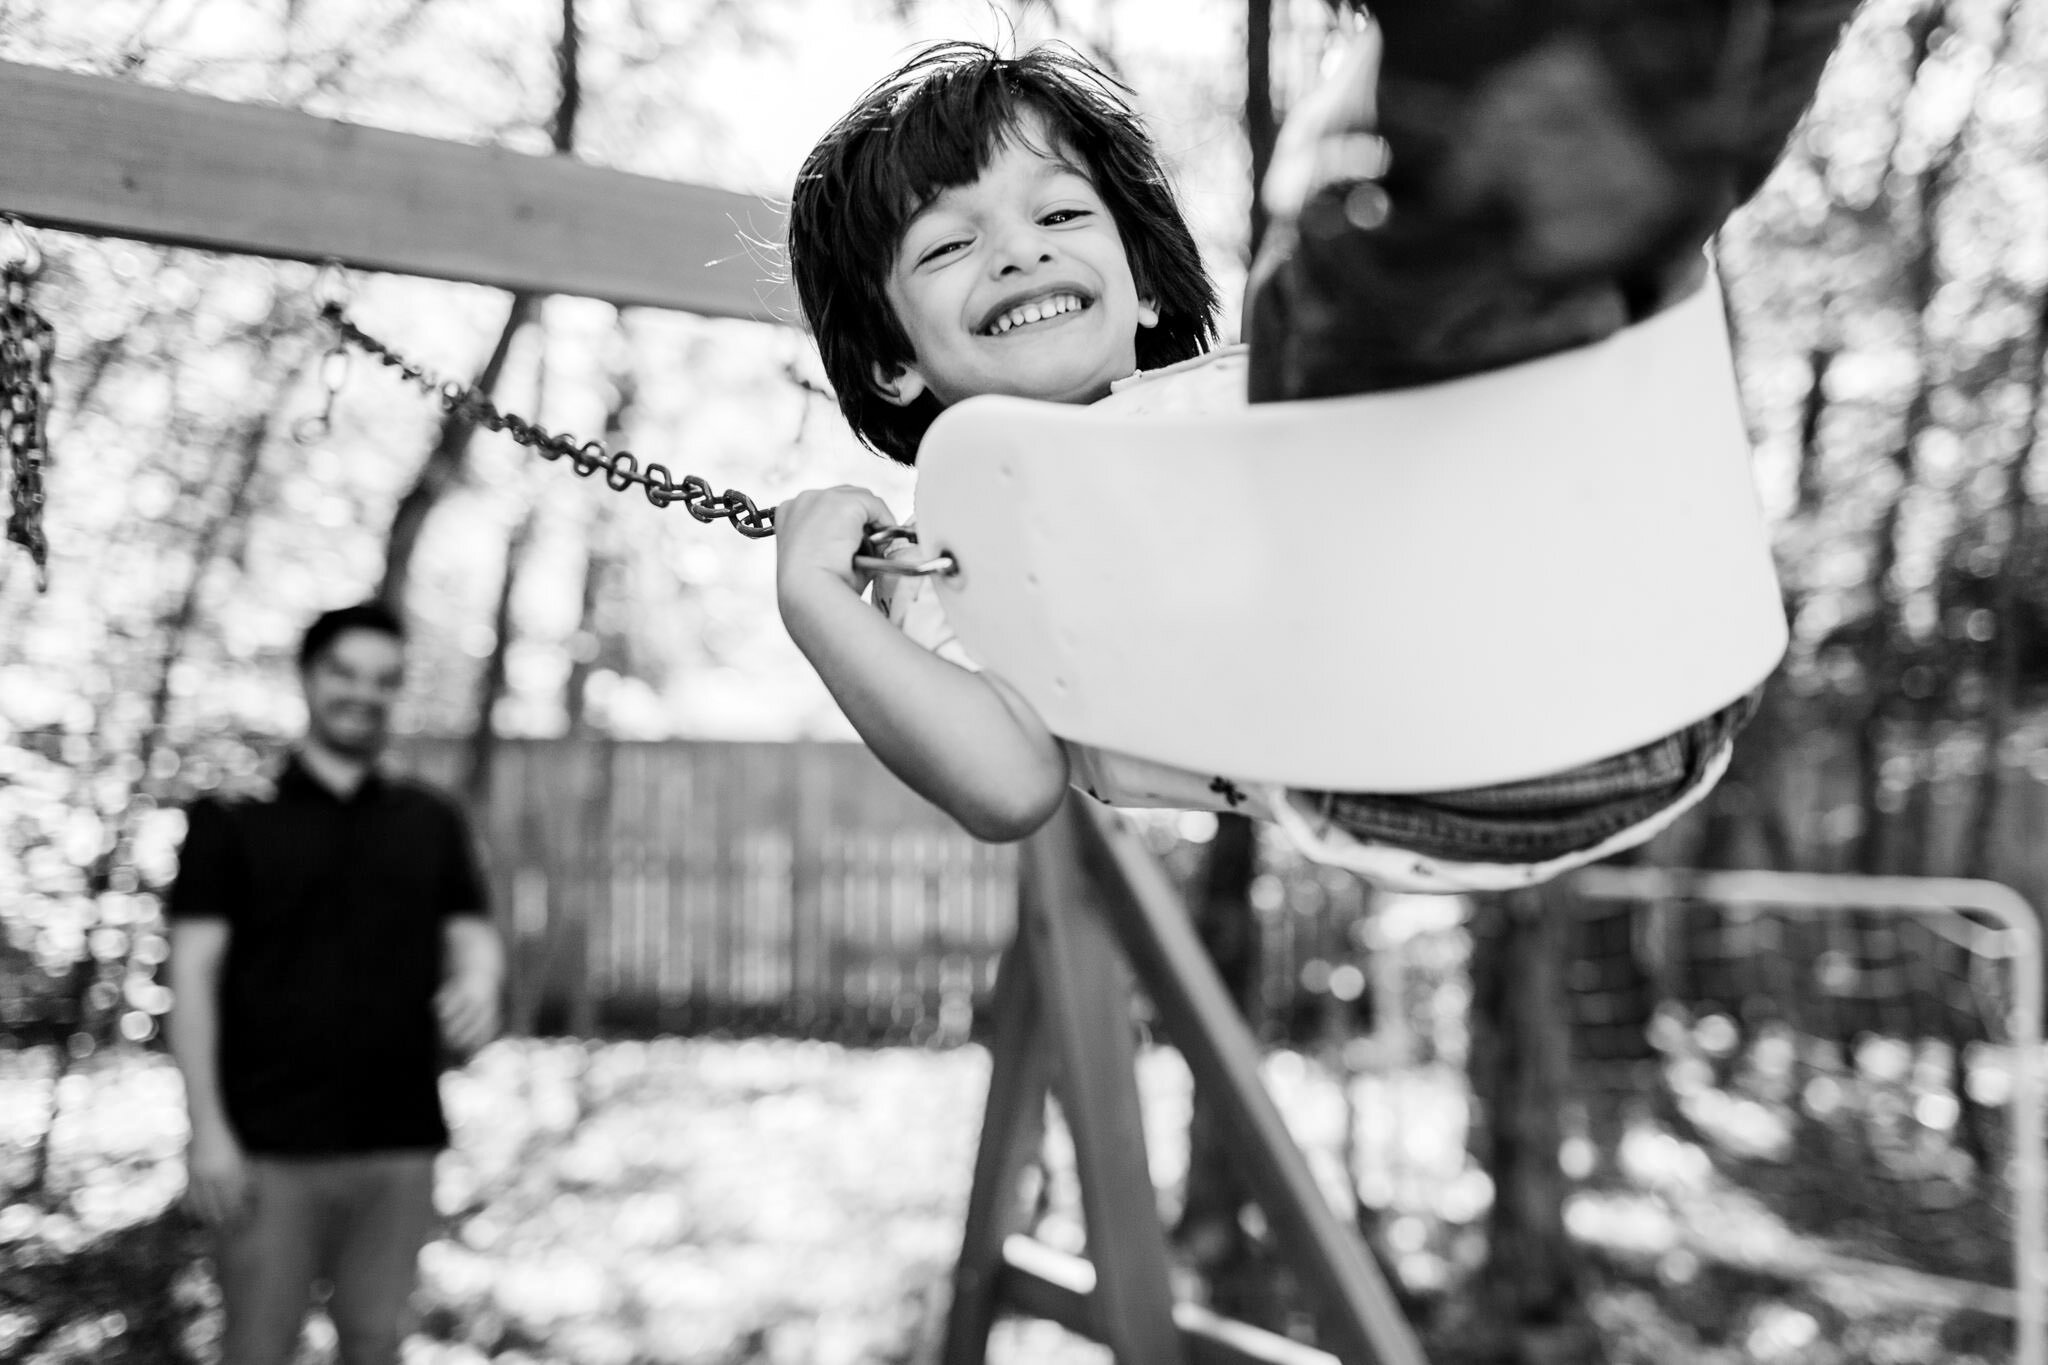 Durham Family Photographer | By G. Lin Photography | Black and white photo of boy on swing